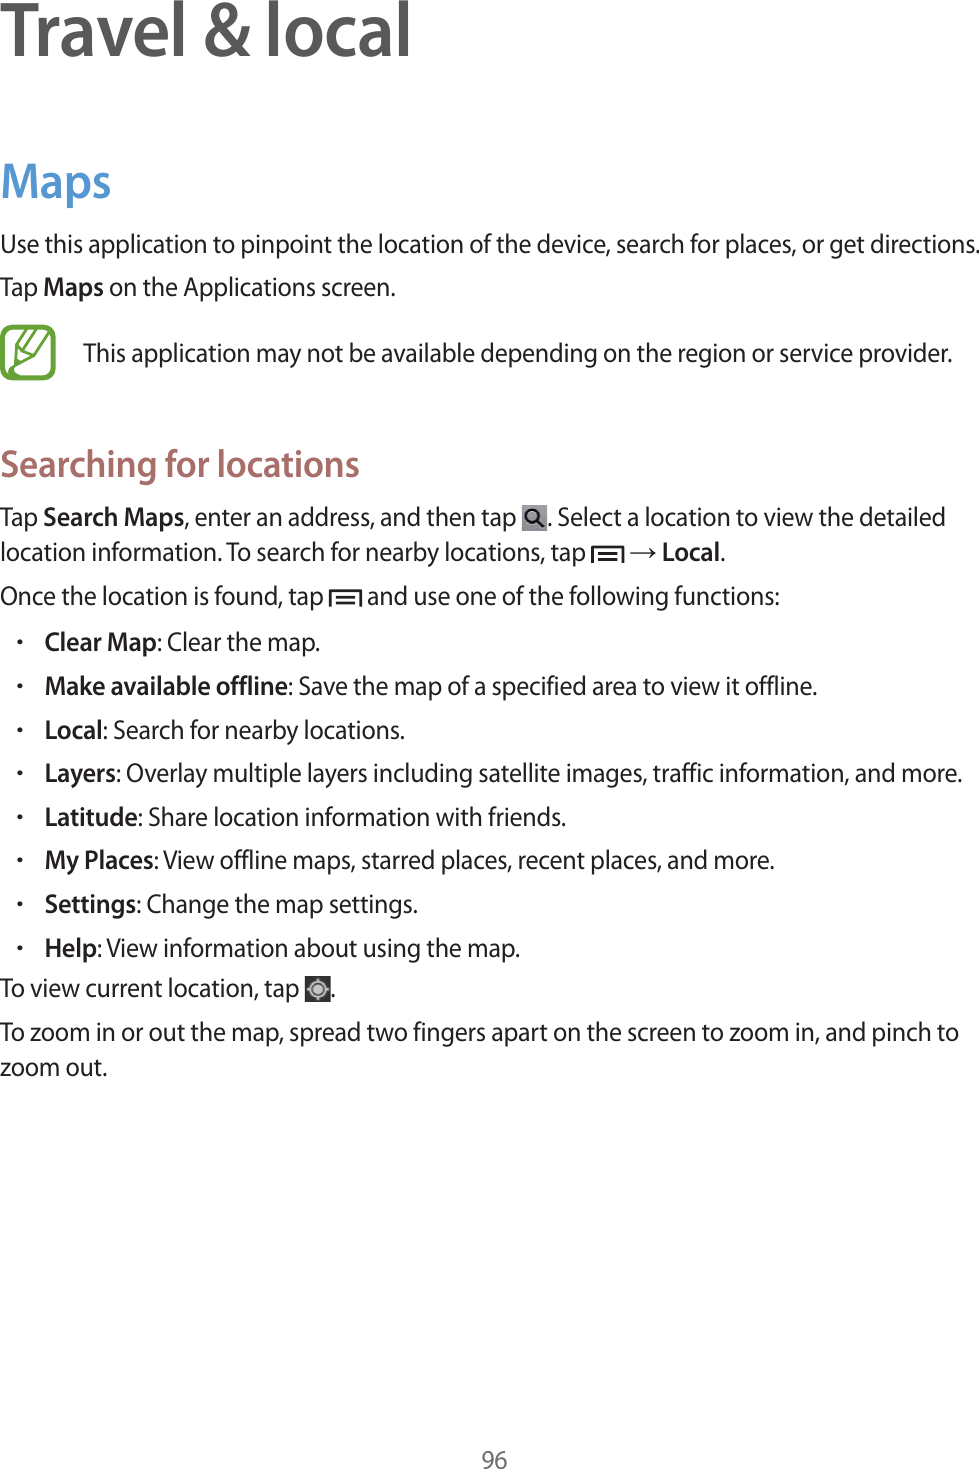 96Travel &amp; localMapsUse this application to pinpoint the location of the device, search for places, or get directions.Tap Maps on the Applications screen.This application may not be available depending on the region or service provider.Searching for locationsTap Search Maps, enter an address, and then tap  . Select a location to view the detailed location information. To search for nearby locations, tap   ĺ Local.Once the location is found, tap   and use one of the following functions:rClear Map: Clear the map.rMake available offline: Save the map of a specified area to view it offline.rLocal: Search for nearby locations.rLayers: Overlay multiple layers including satellite images, traffic information, and more.rLatitude: Share location information with friends.rMy Places: View offline maps, starred places, recent places, and more.rSettings: Change the map settings.rHelp: View information about using the map.To view current location, tap  .To zoom in or out the map, spread two fingers apart on the screen to zoom in, and pinch to zoom out.